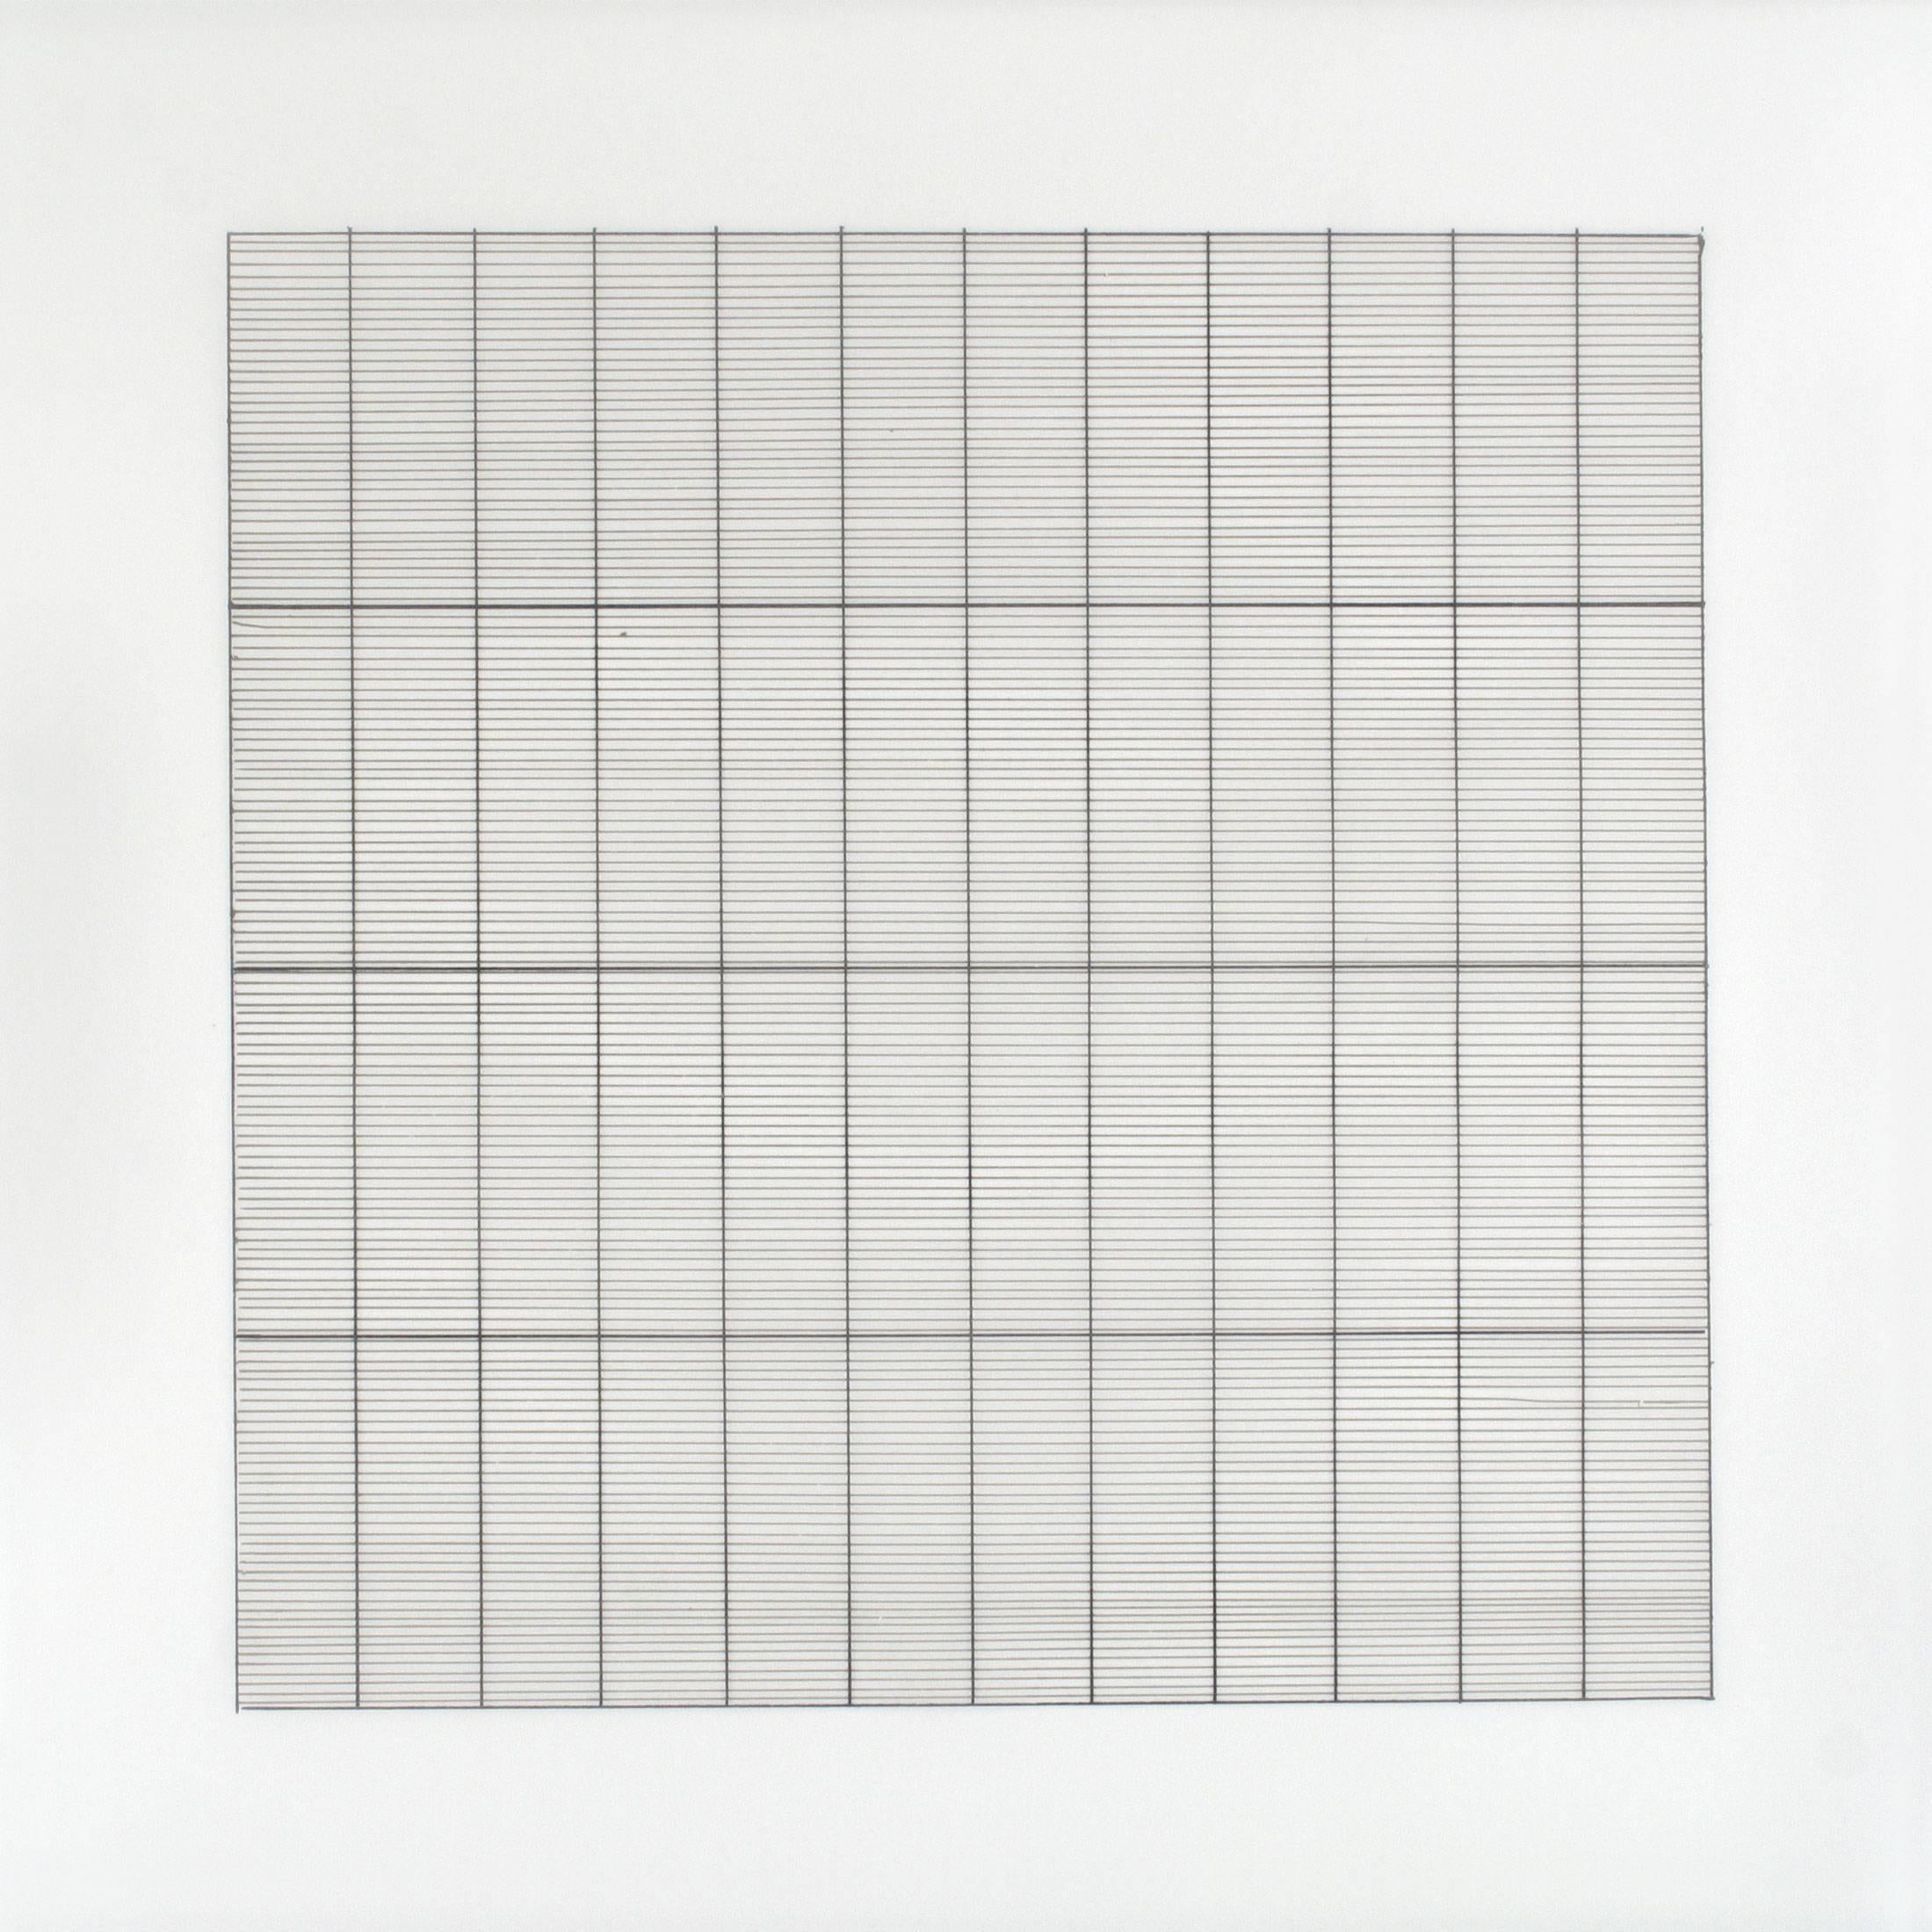 AGNES MARTIN. Paintings and Drawings 1974-1990 5